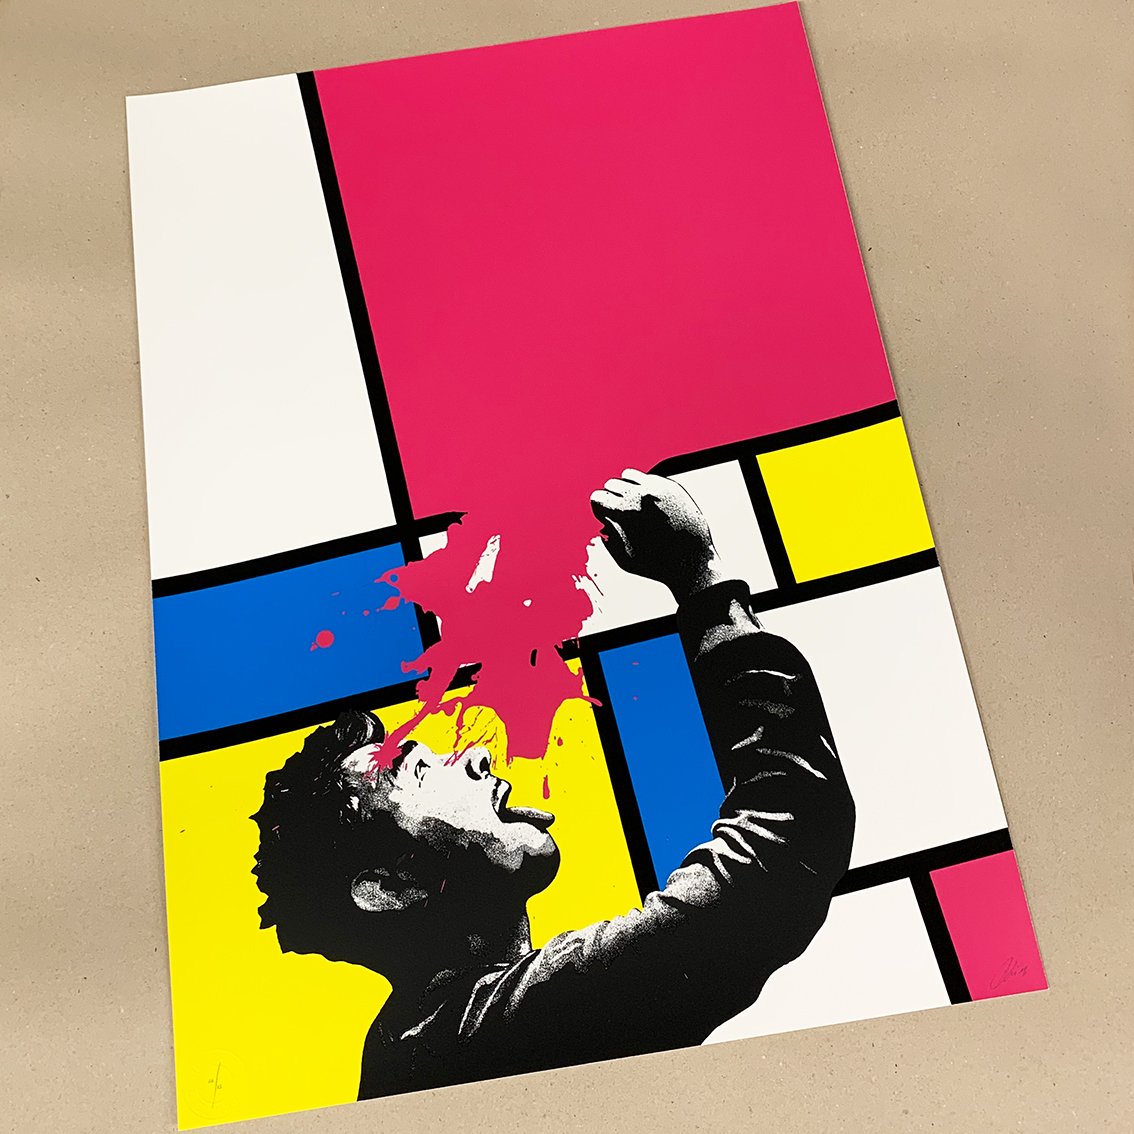 Image of "Soak Up Art When You Can" Screen Print CMYK Edition of 25